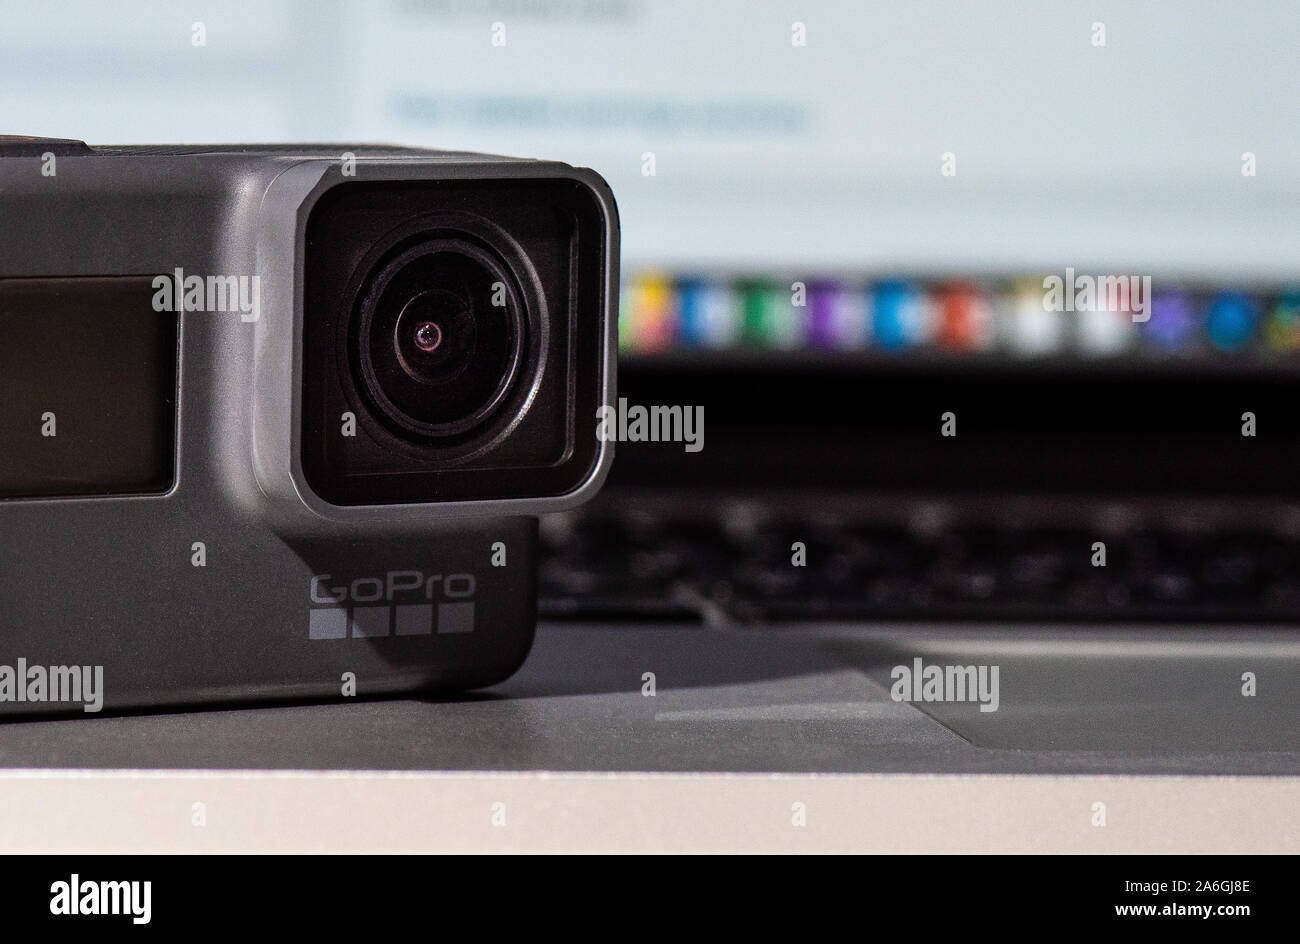 GoPro Hero 5, 6 black edition on a laptop ready to edit footage, Lying down  Stock Photo - Alamy